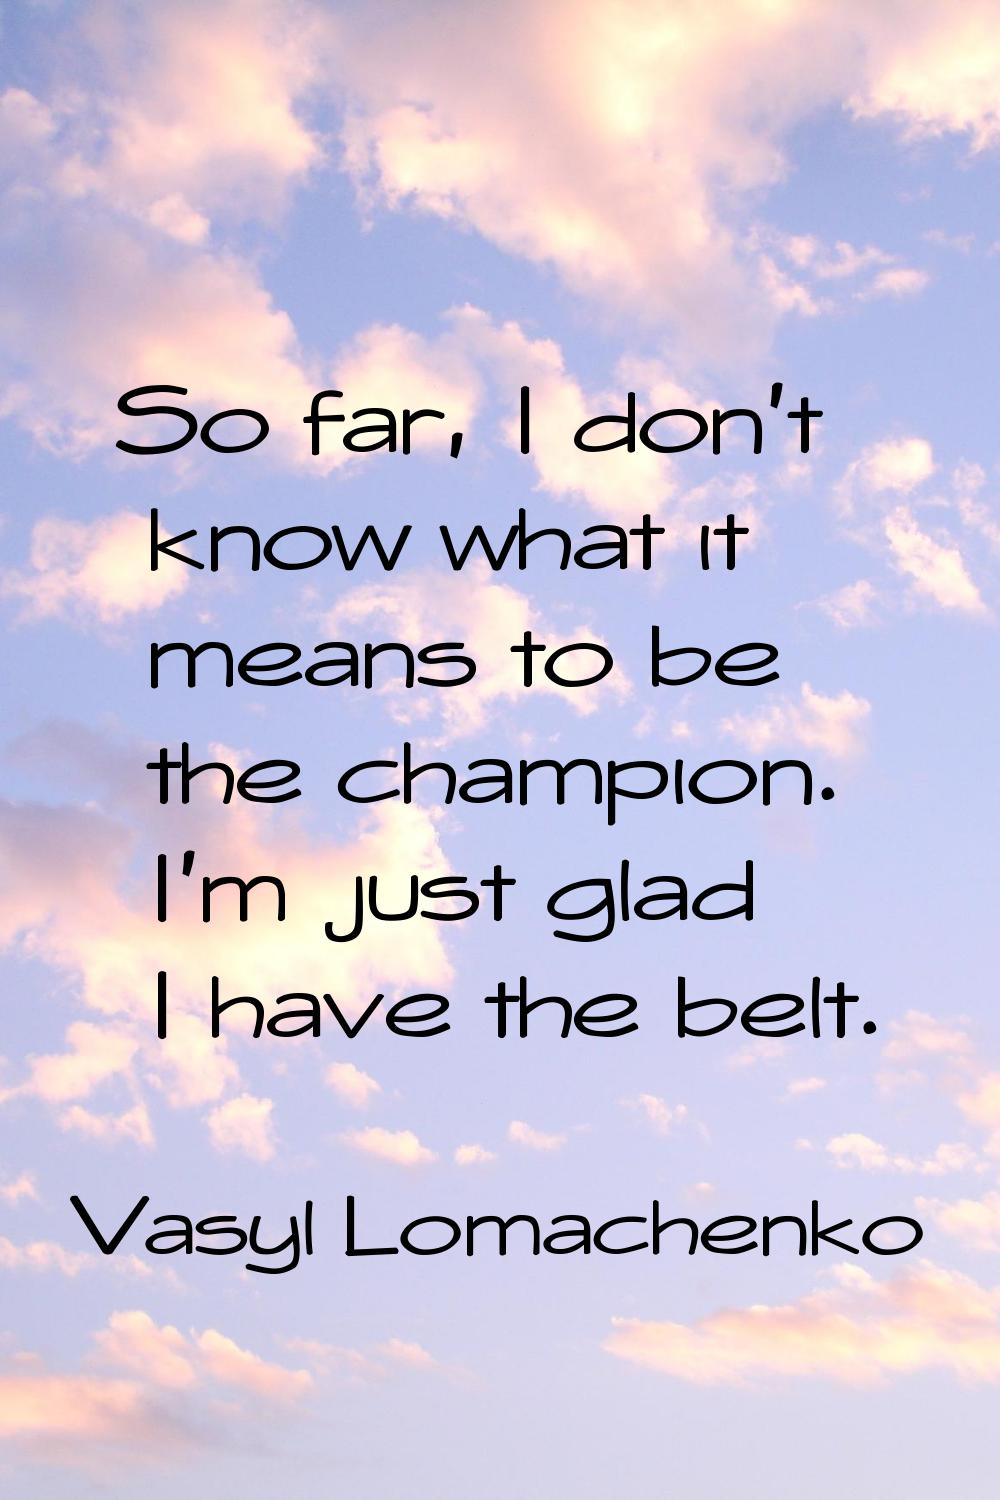 So far, I don't know what it means to be the champion. I'm just glad I have the belt.